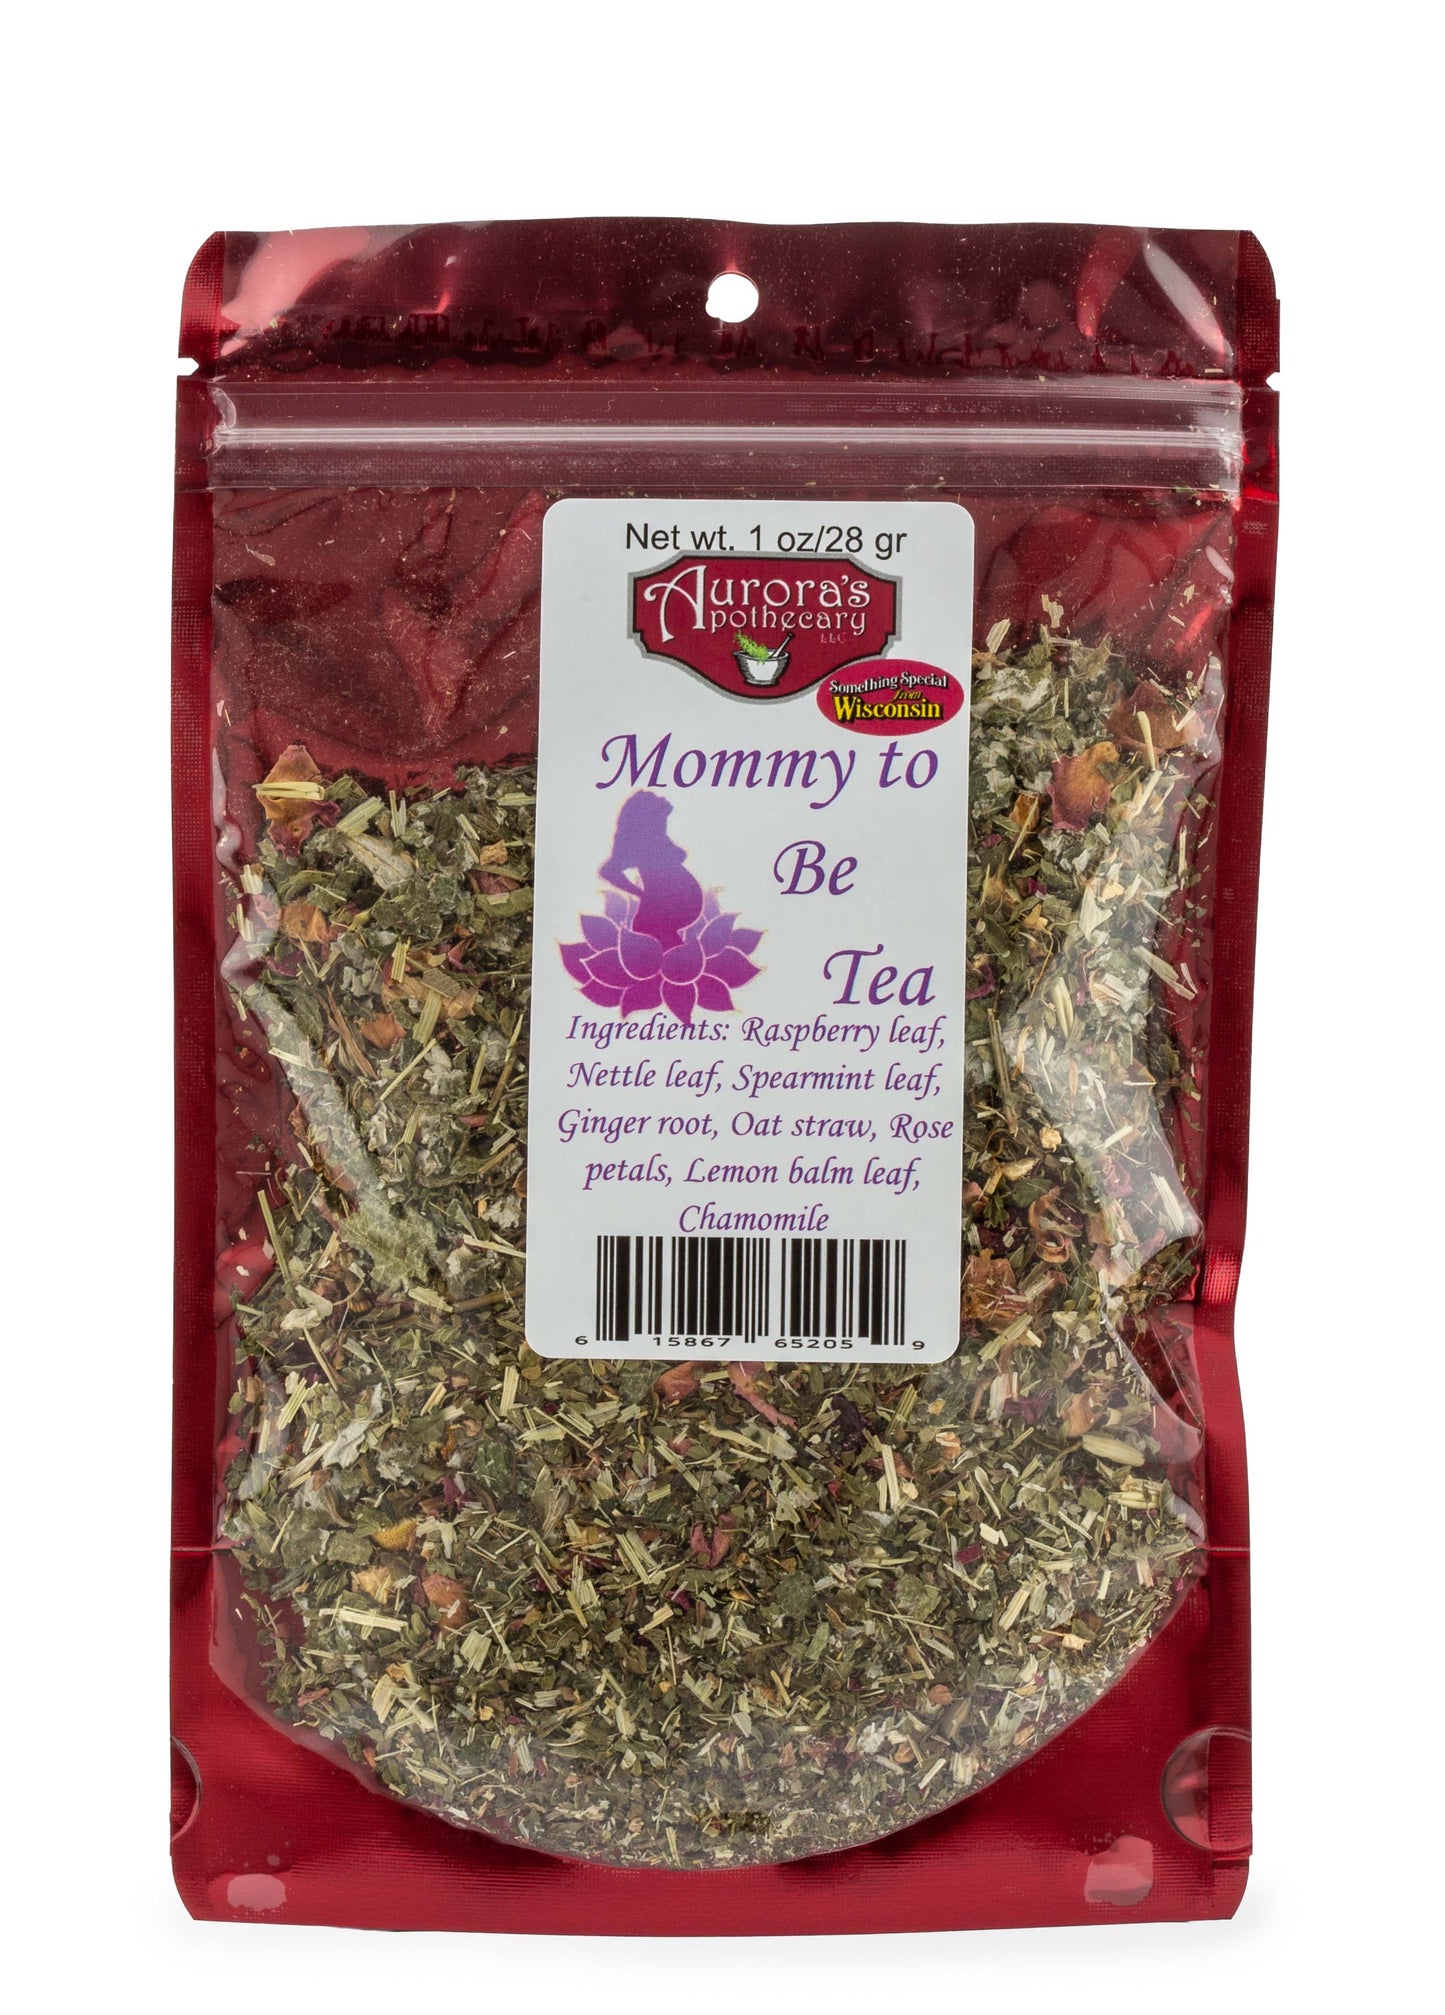 Mommy to Be Tea